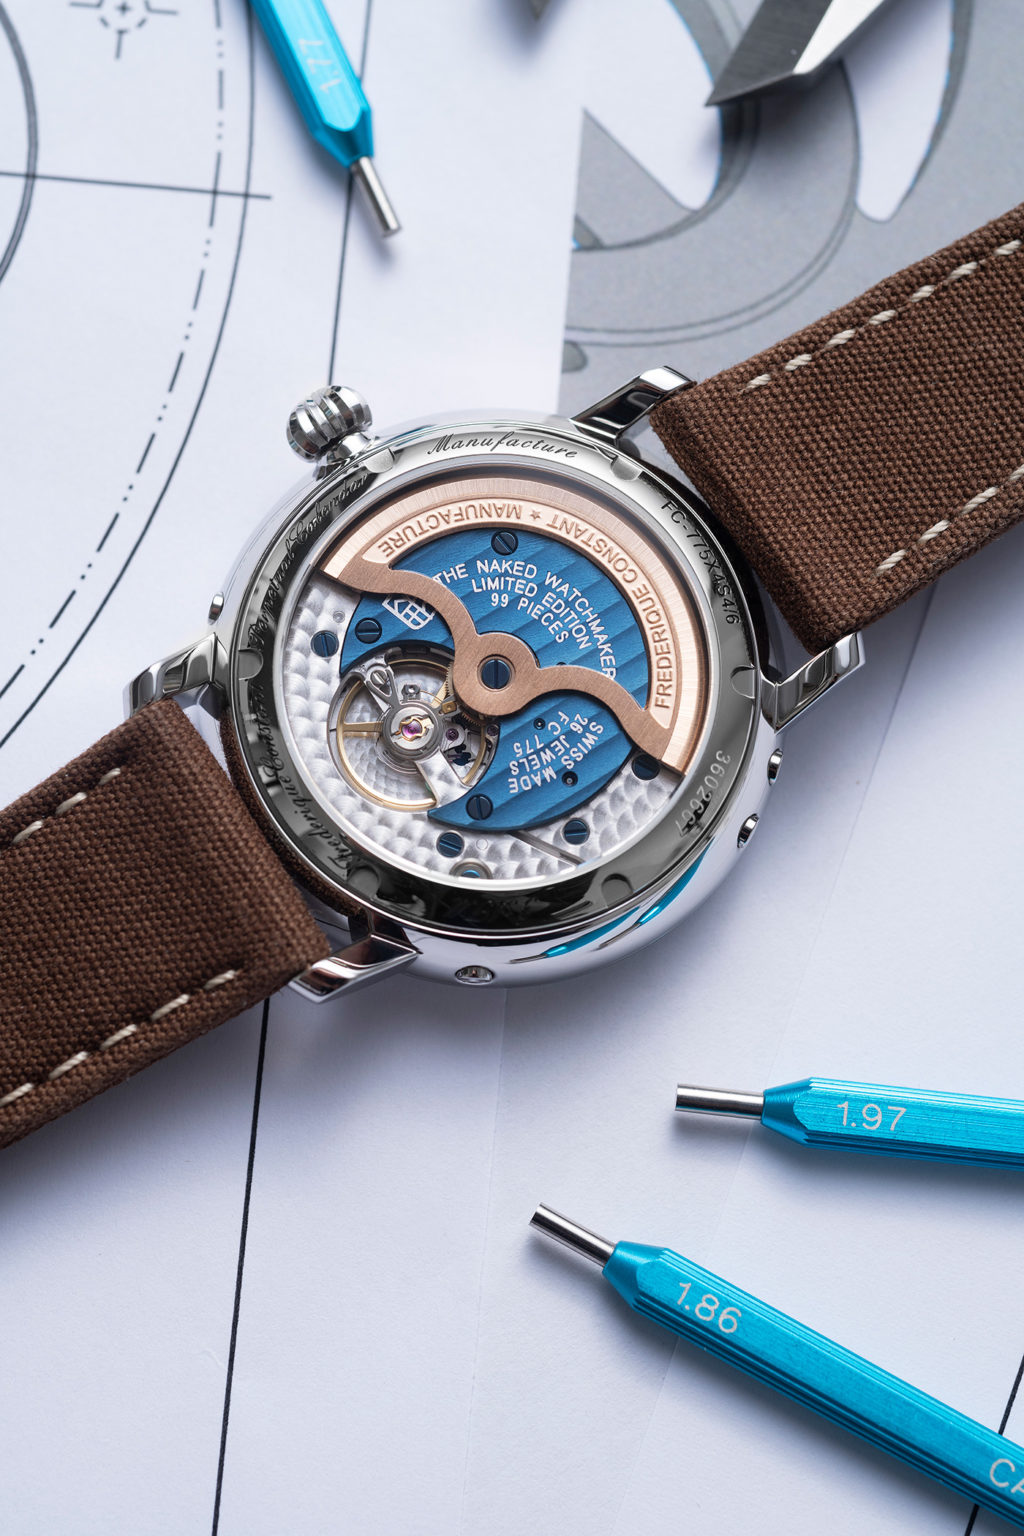 The Naked Watchmaker Frederique Constant Slimline Perpetual Calendar Manufacture Dost Pno